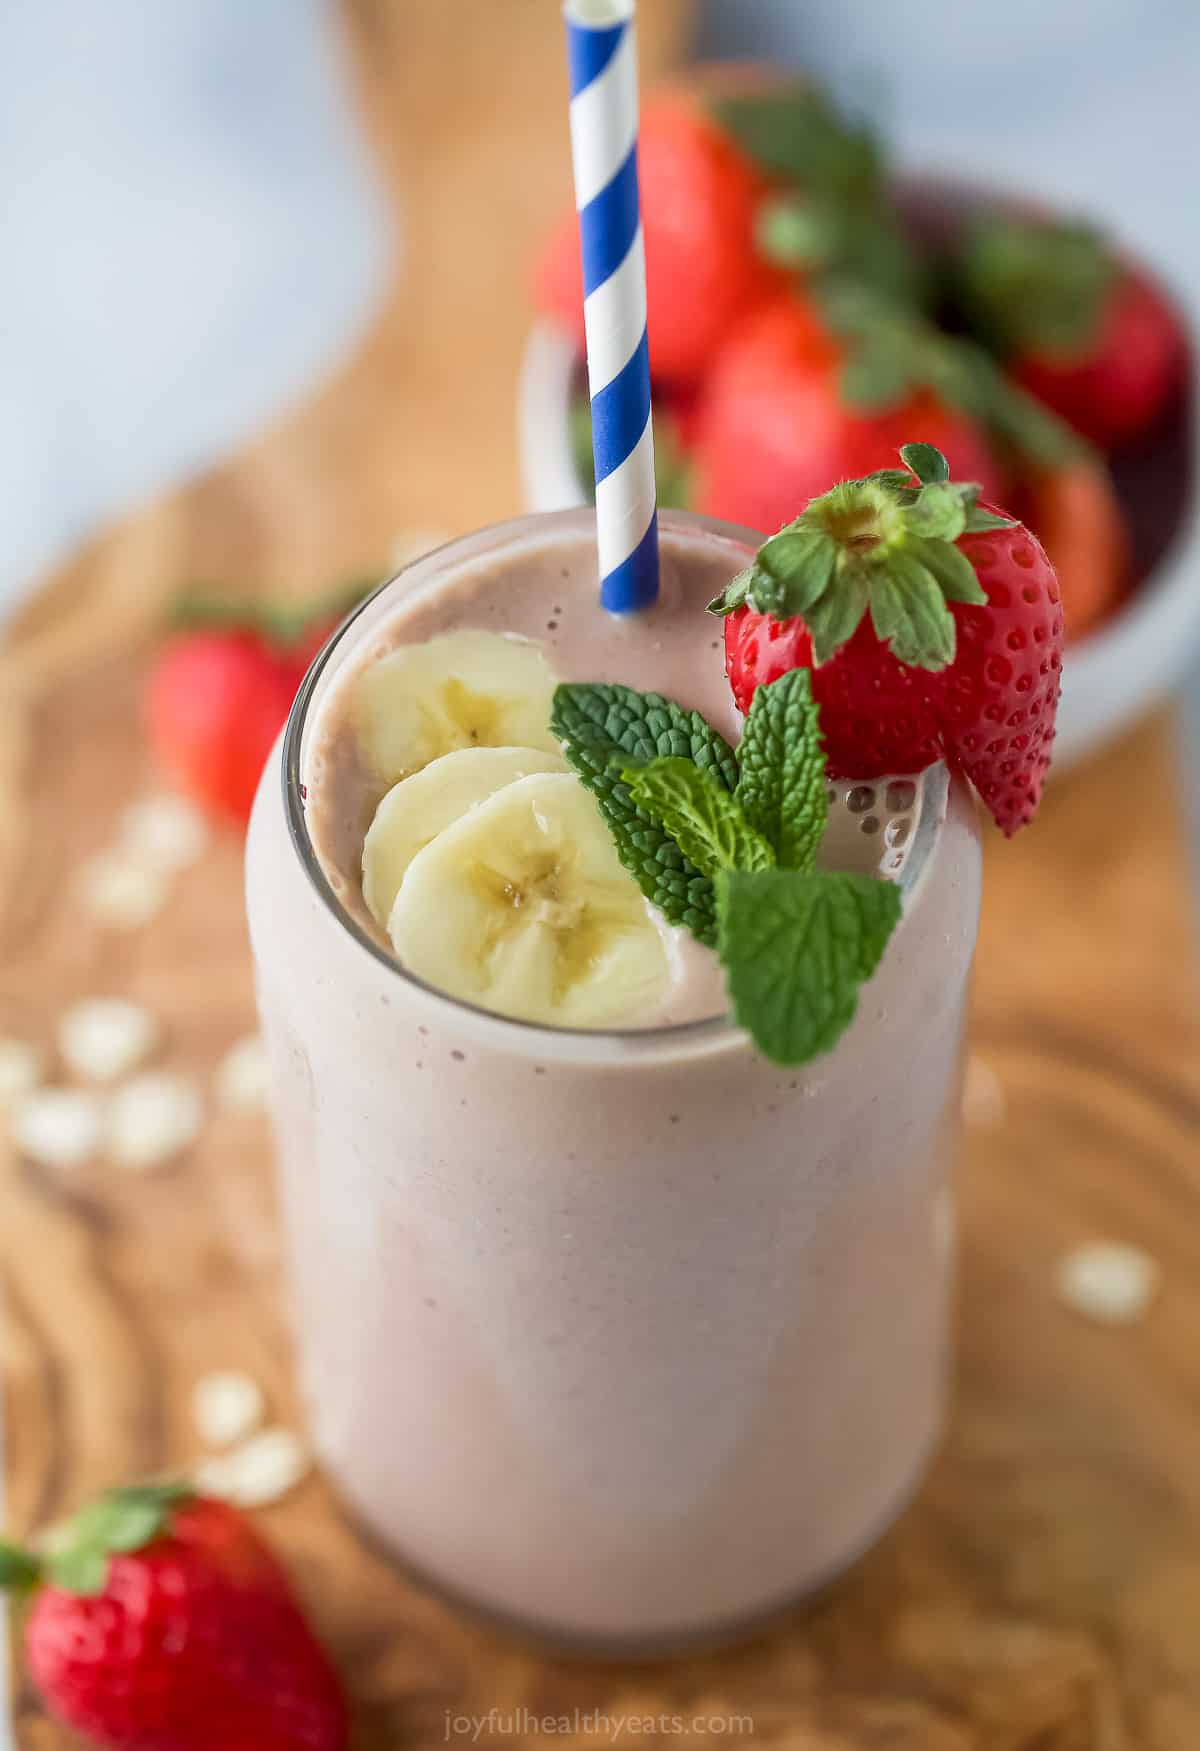 A close-up shot of a strawberry banana smoothie garnished with banana slices, a strawberry and a mint leaf